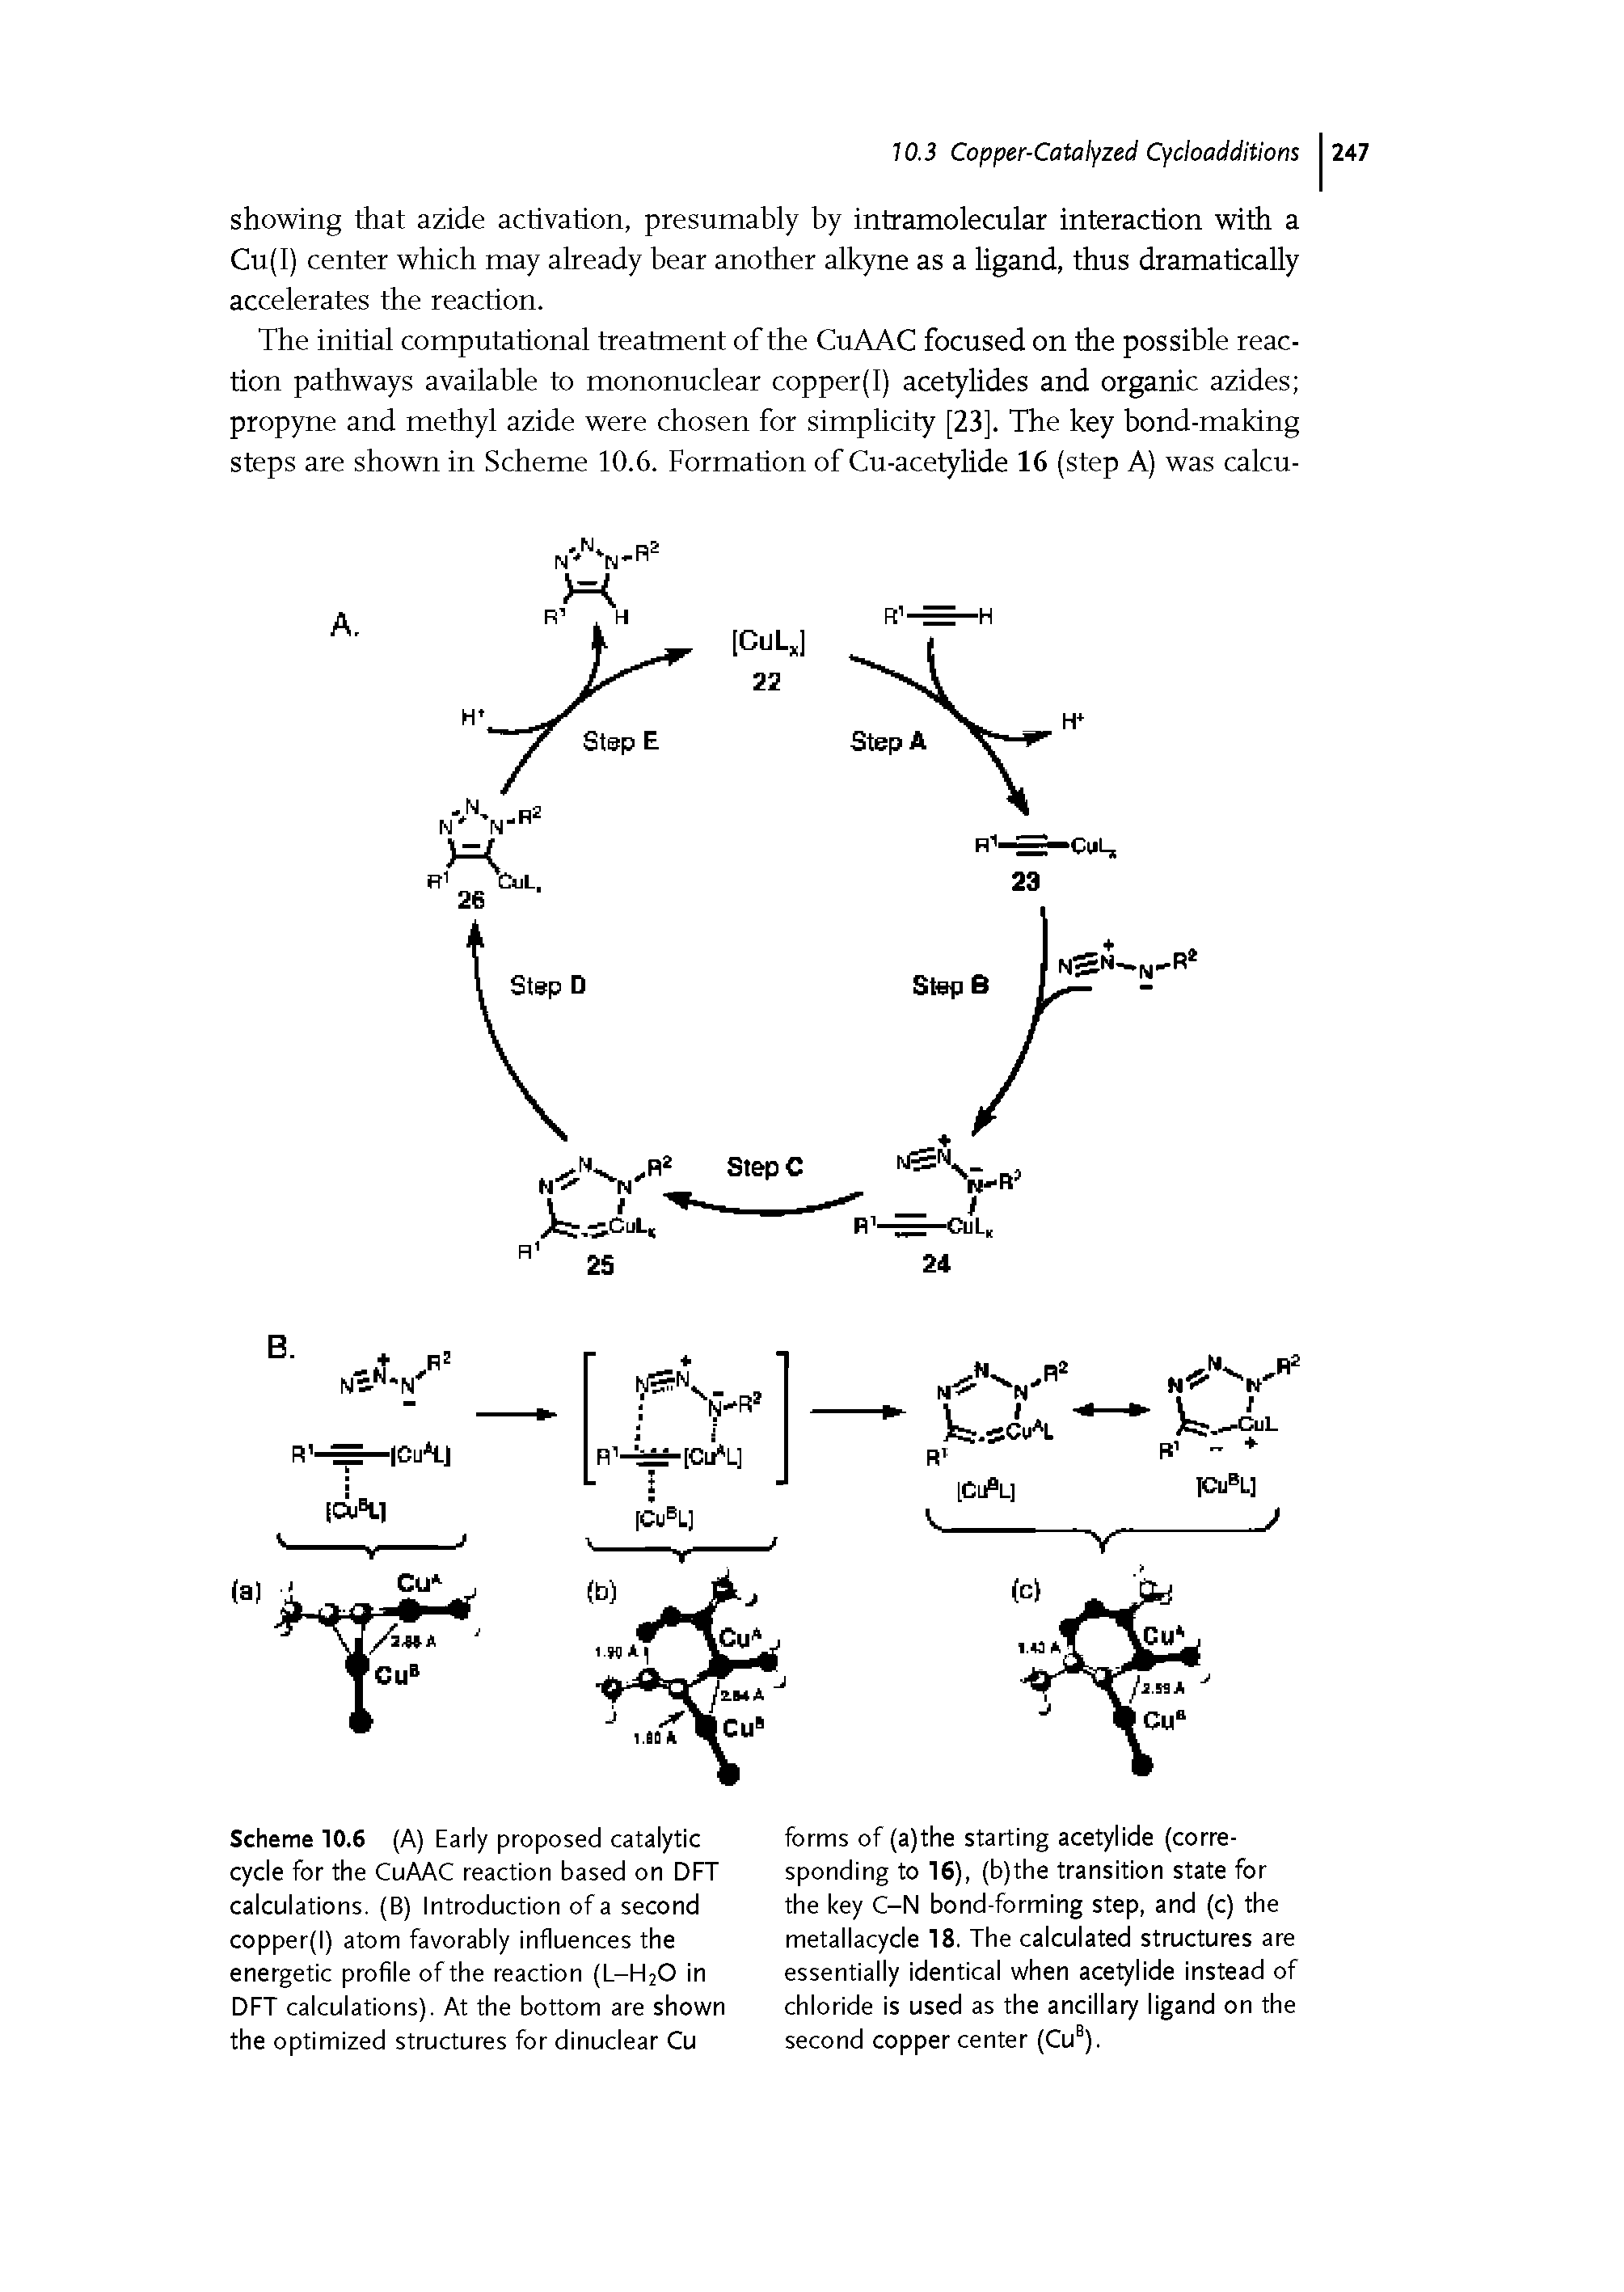 Scheme 10.6 (A) Early proposed catalytic cycle for the CuAAC reaction based on DFT calculations. (B) Introduction of a second copper(l) atom favorably influences the energetic profile of the reaction (L-H2O in DFT calculations). At the bottom are shown the optimized structures for dinuclear Cu...